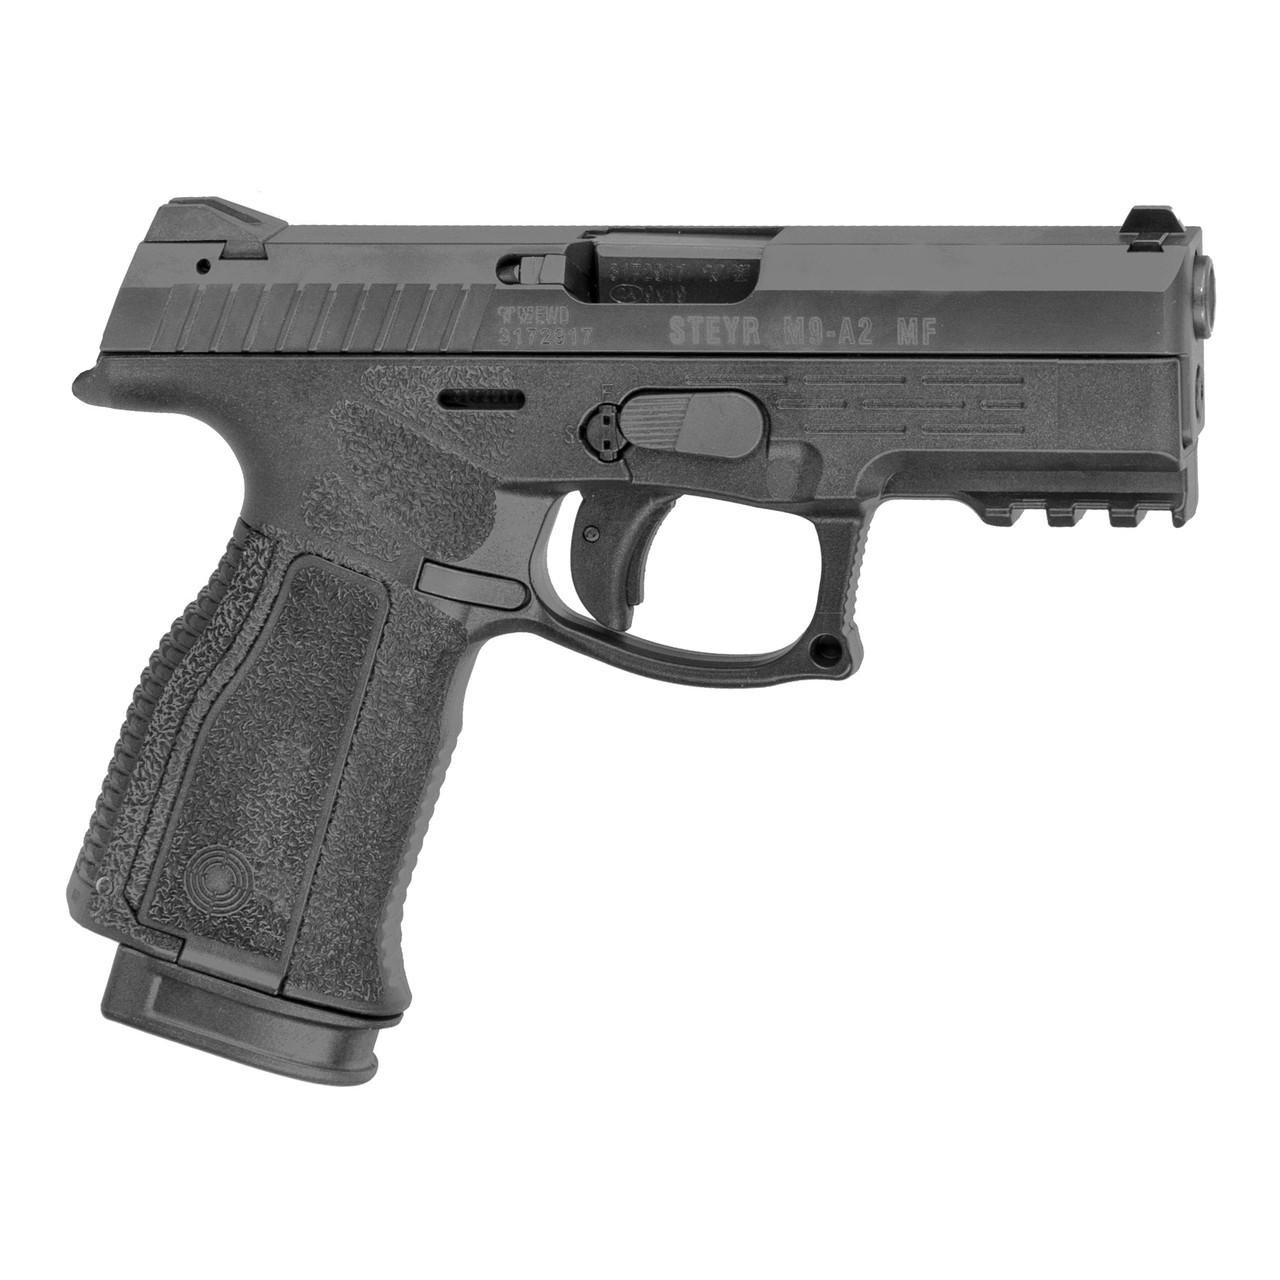 Steyr Arms M9-A2 MF 9MM Pistol - $399.98